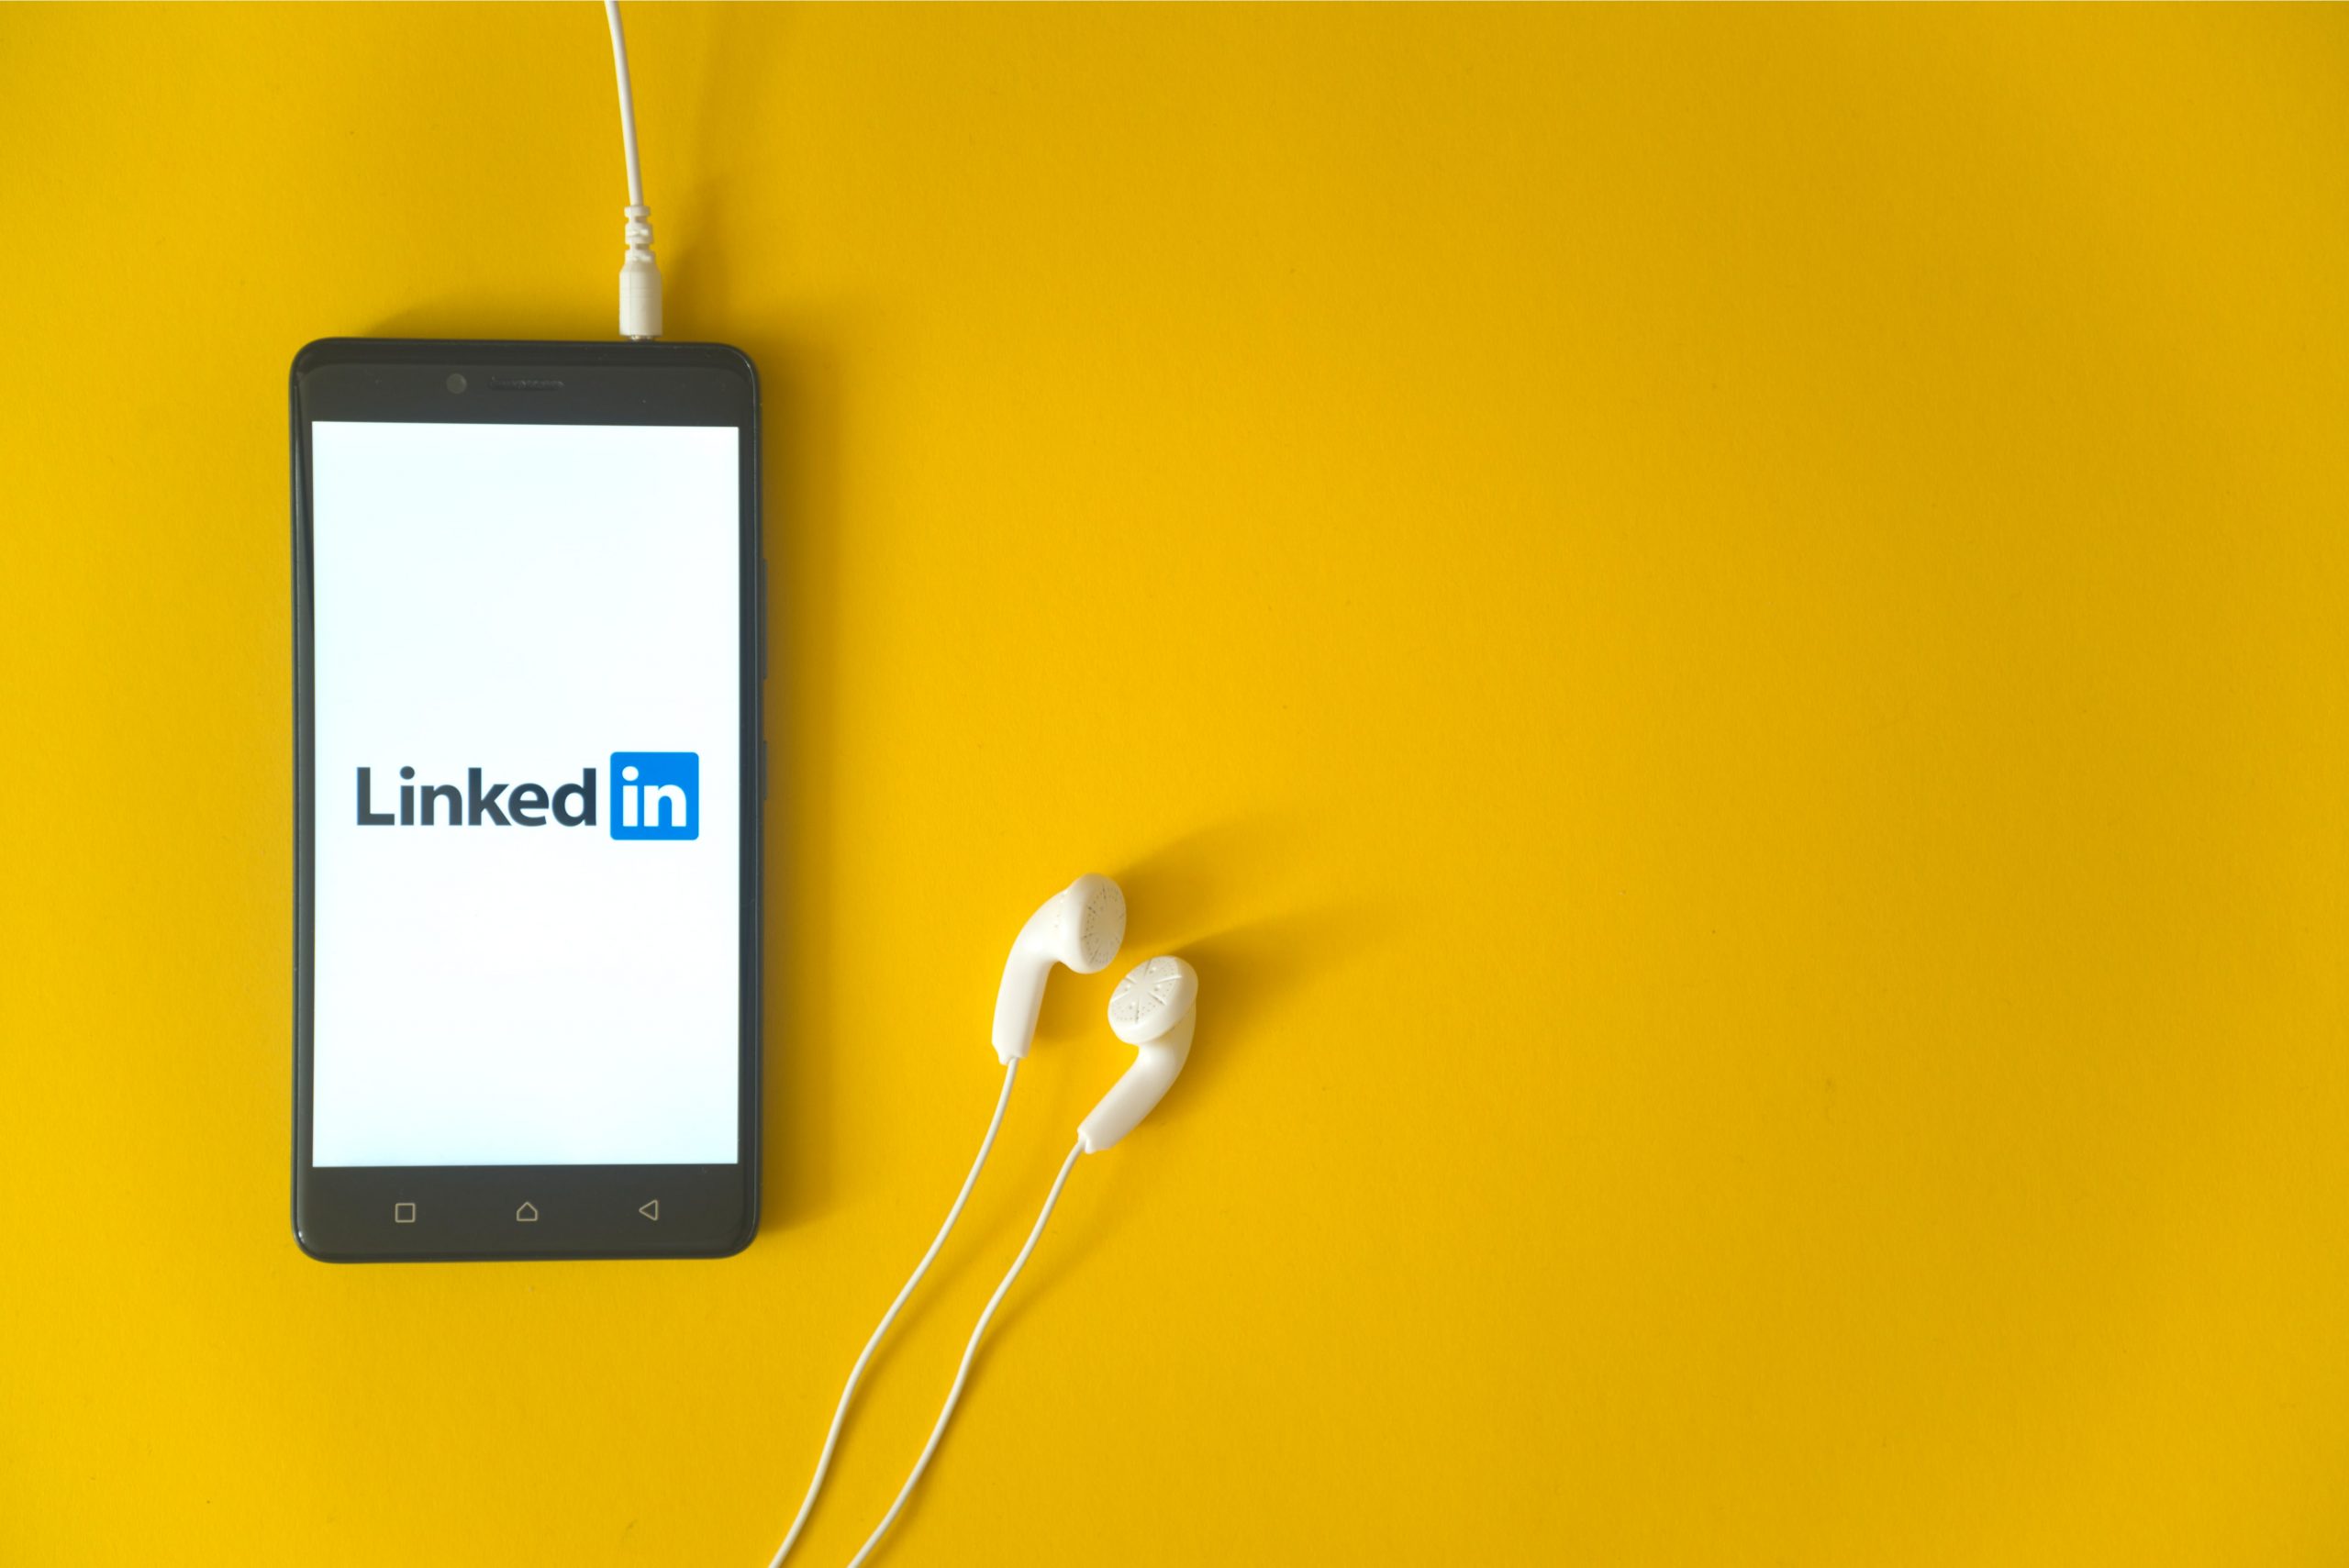 We just passed 10K followers on Linkedin. Here’s how we did it…